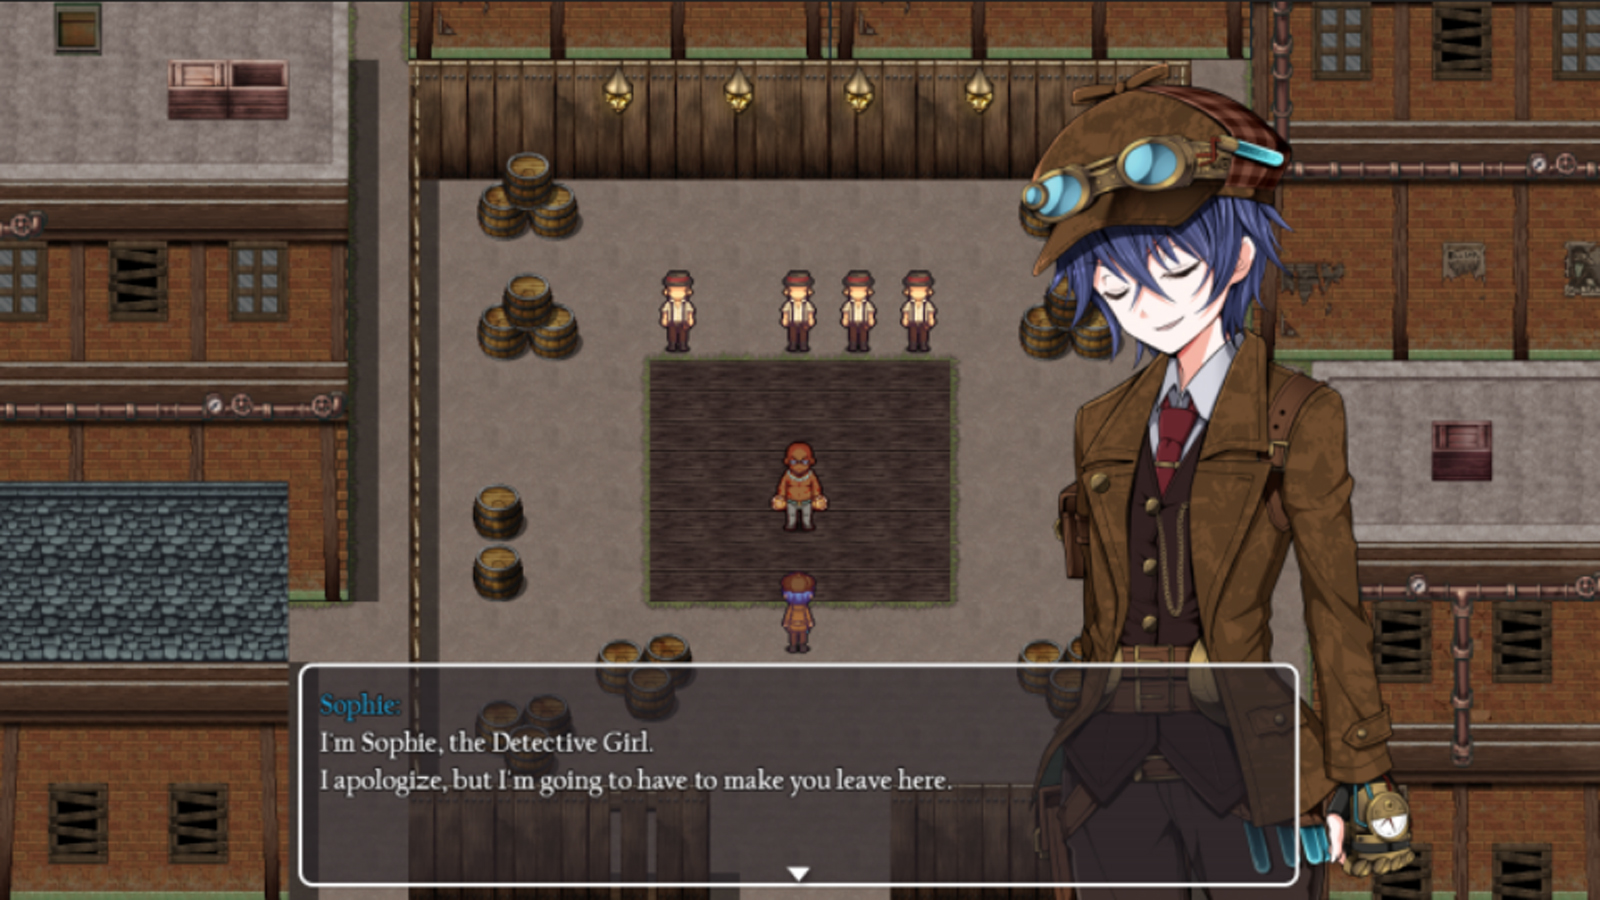 Find detailed information about Detective Girl of the Steam City